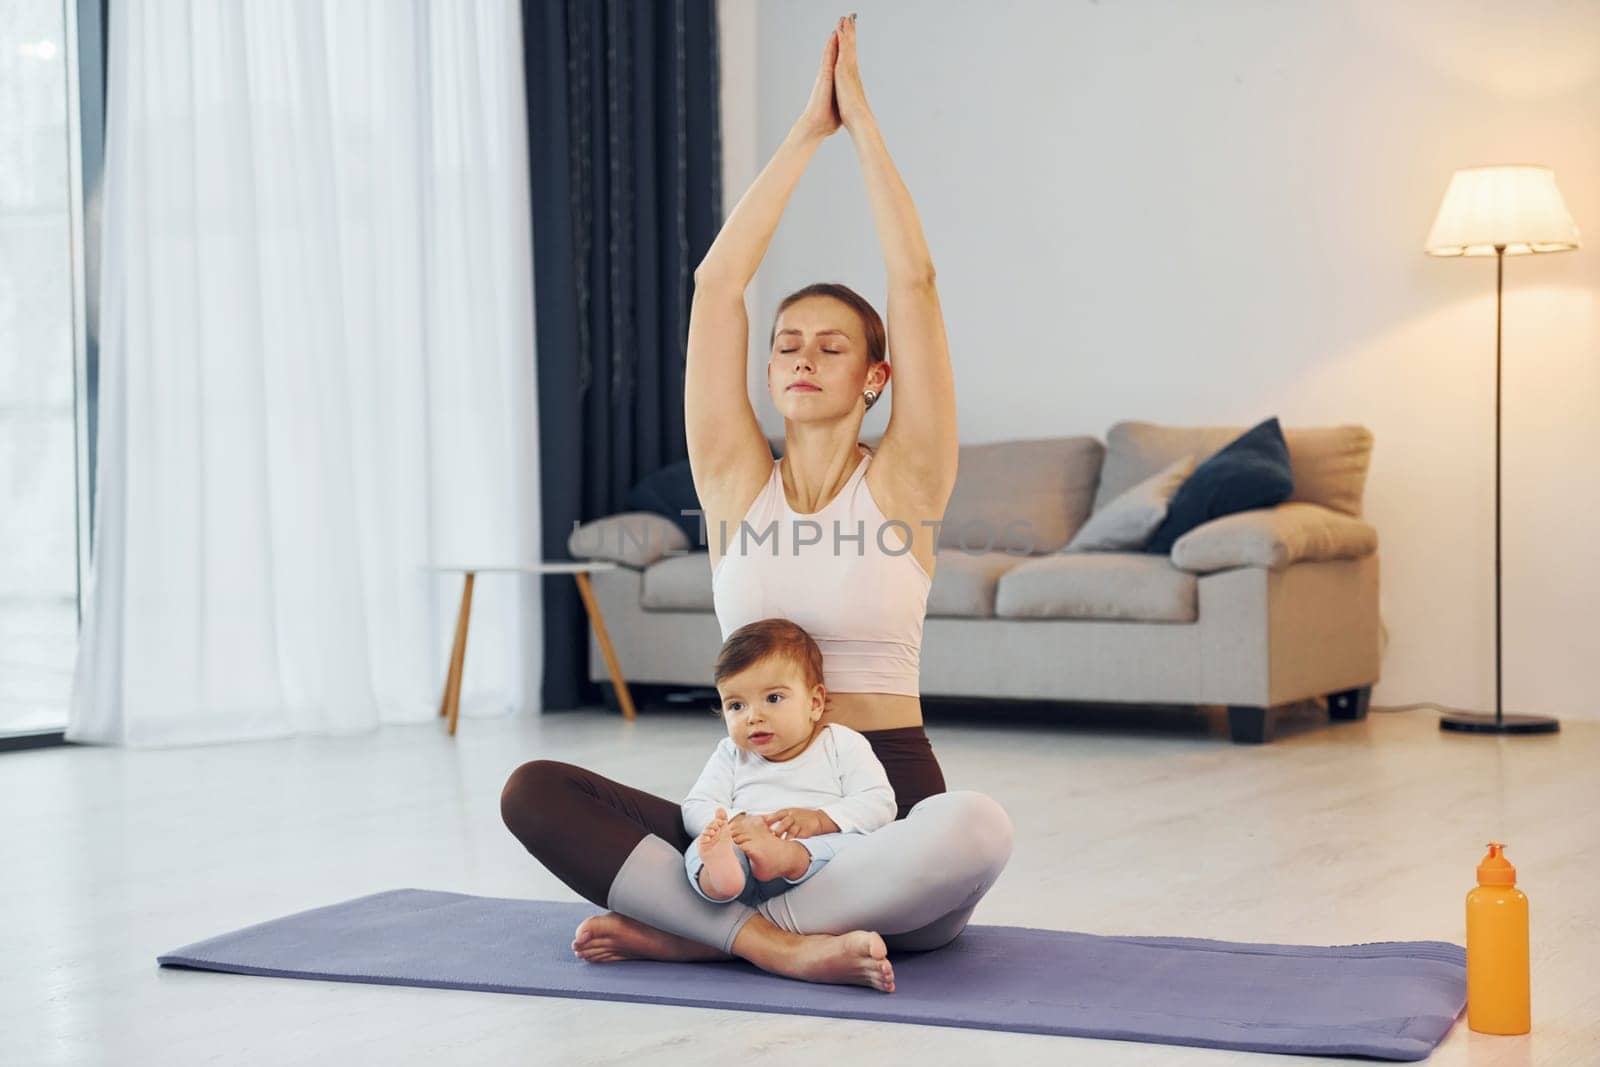 Doing yoga exercises. Mother with her little daughter is at home together by Standret